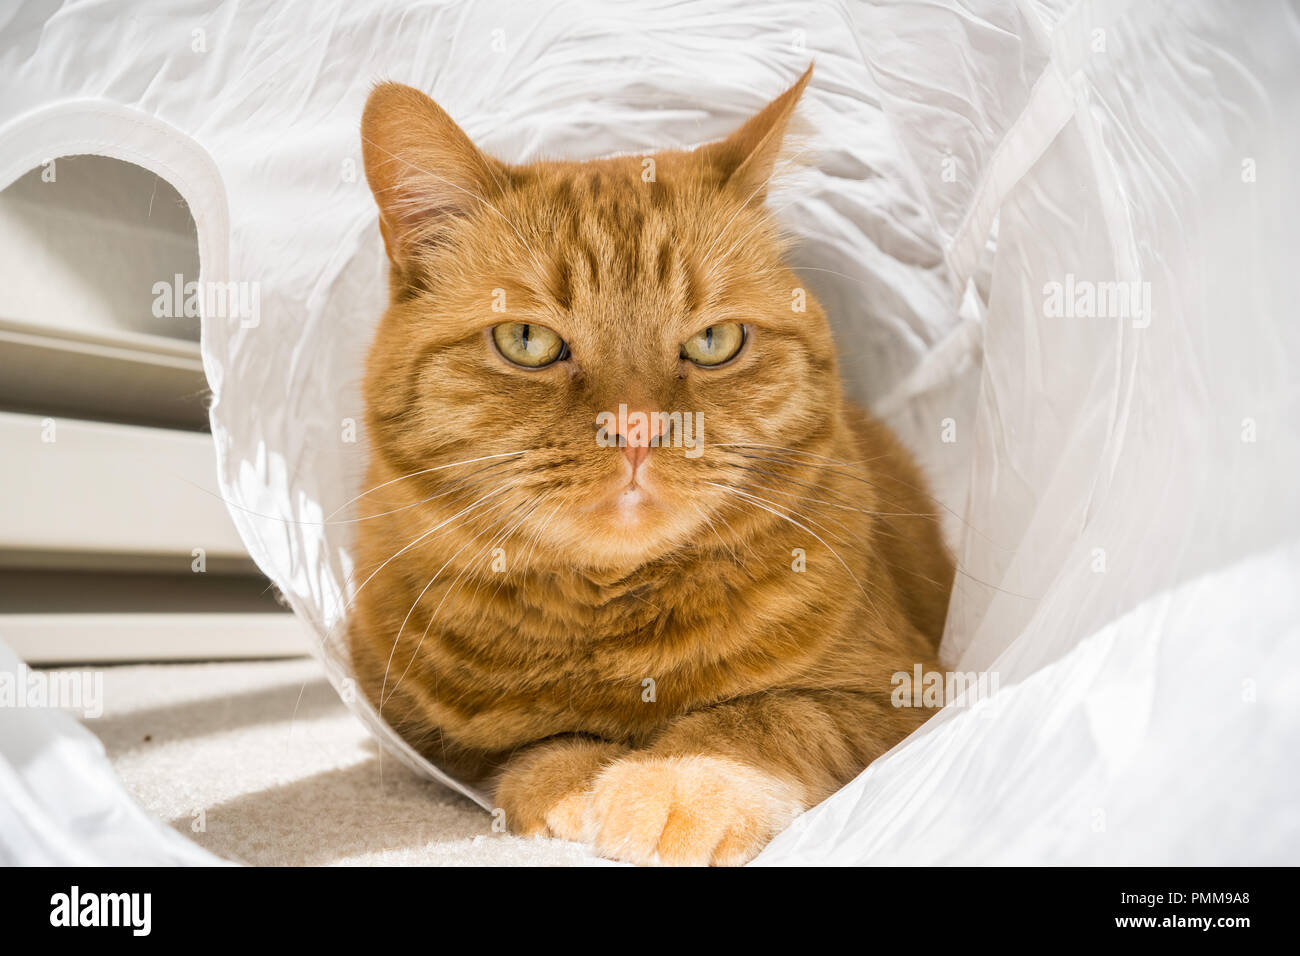 Large orange cat playing and posing for the camera while in a cat tunnel Stock Photo